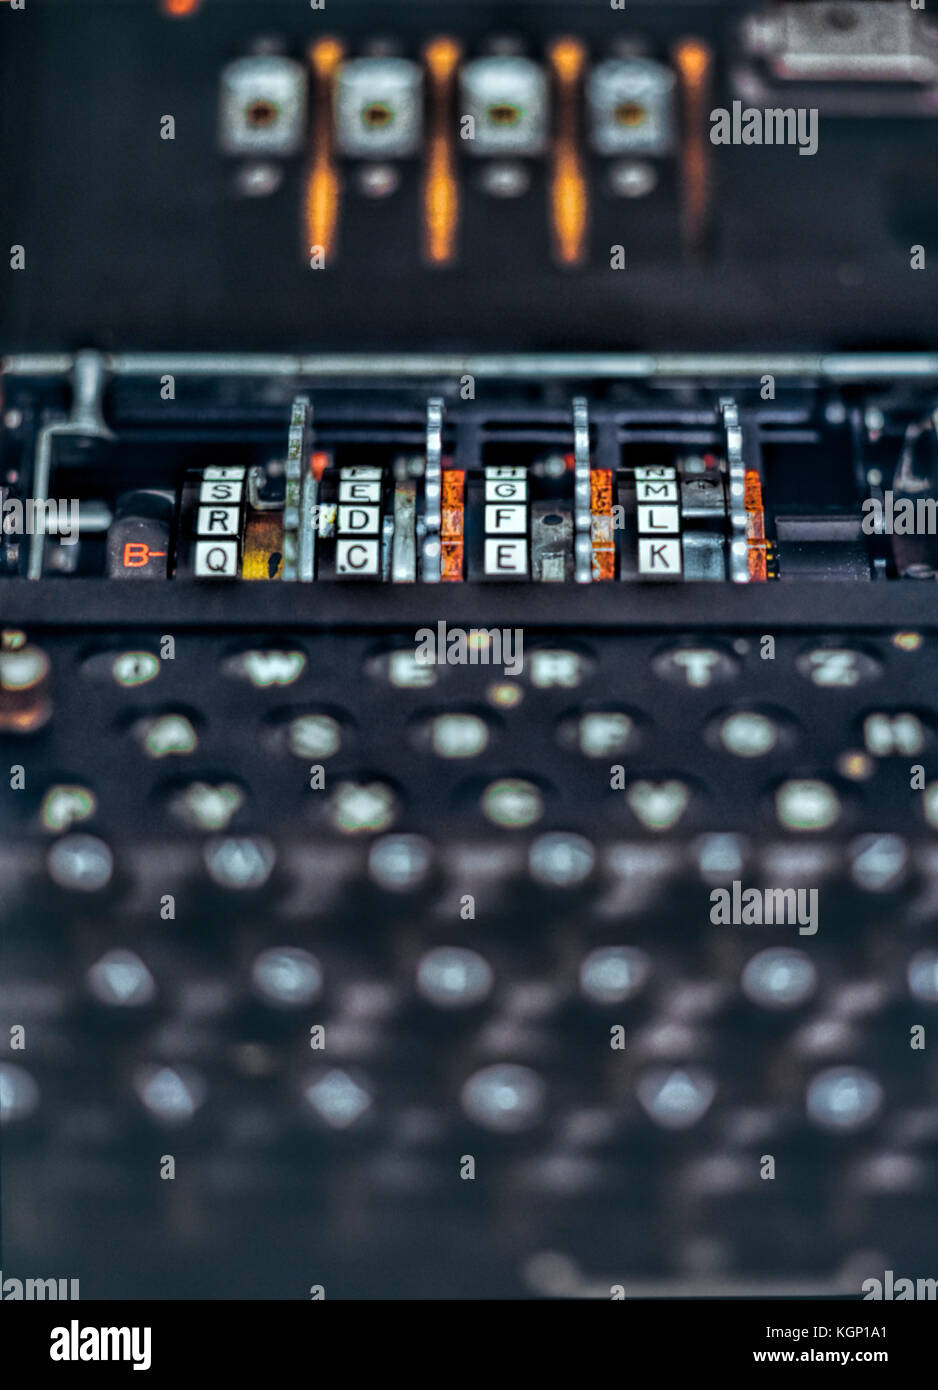 Rotors and keyboard of the German World War 2 Enigma encryption/decryption device. Stock Photo